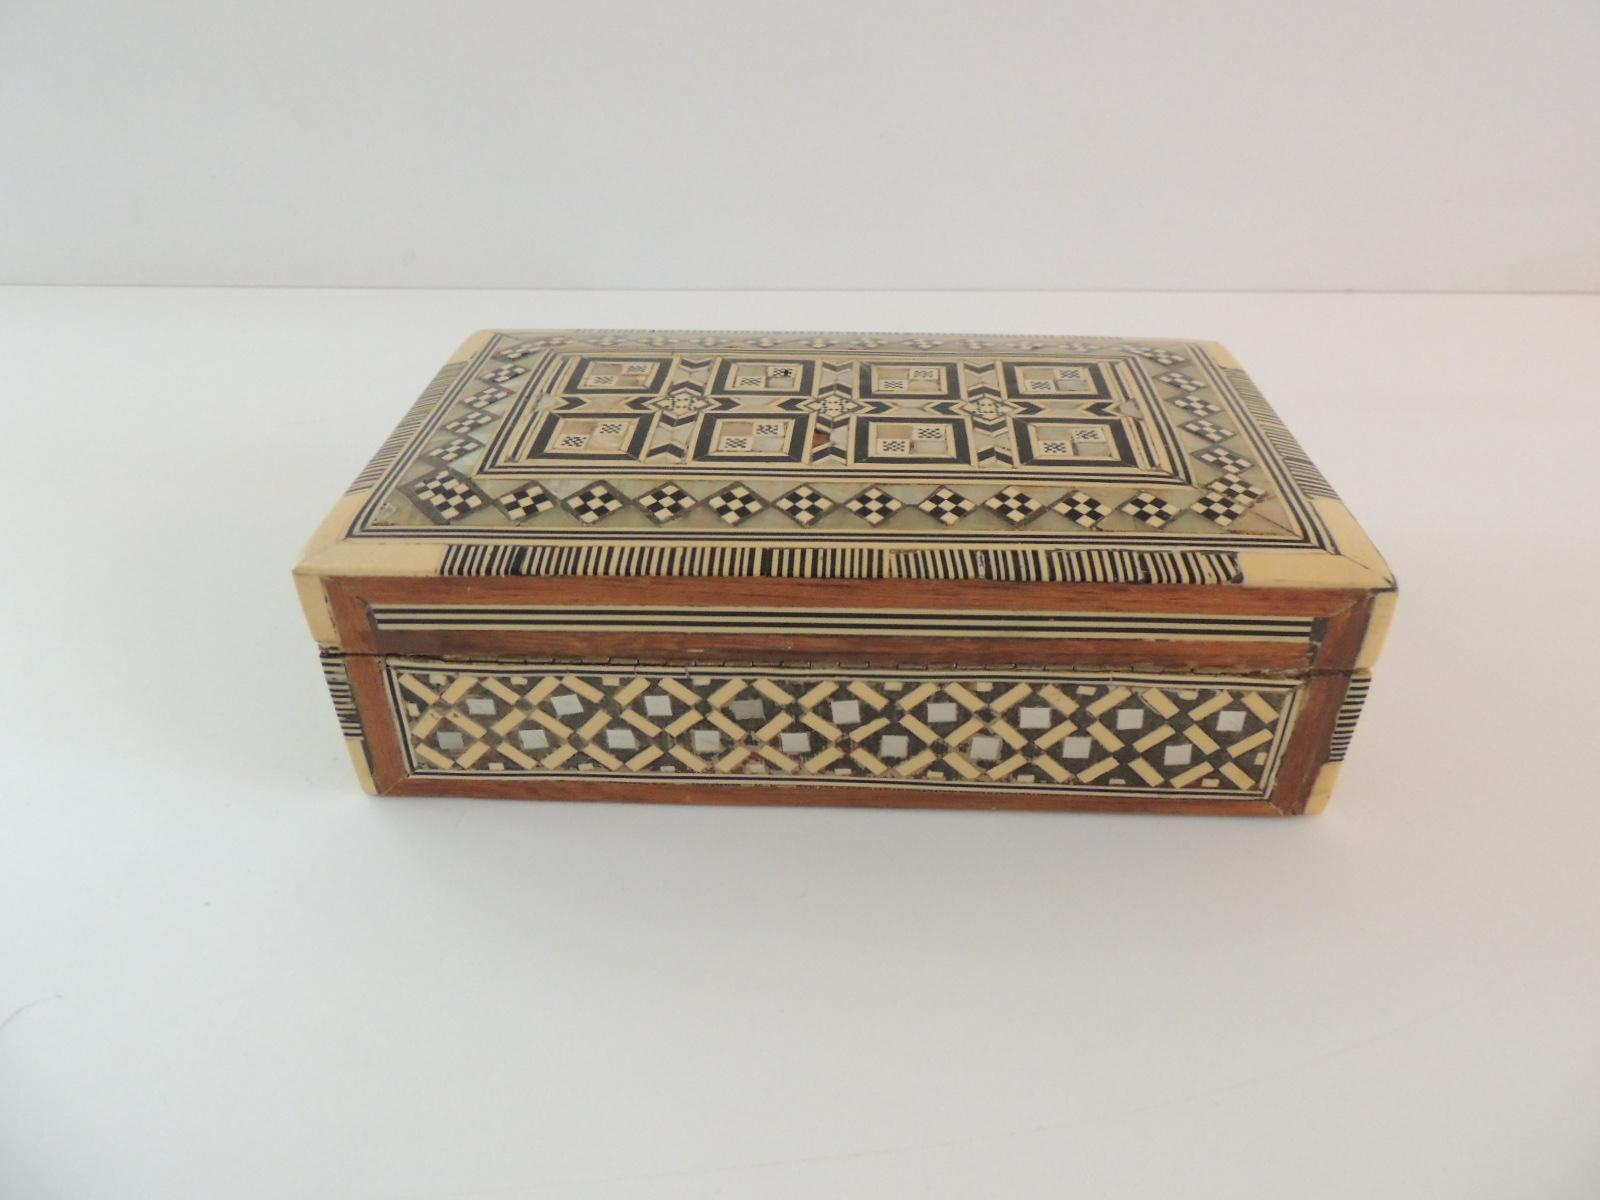 Moorish Syrian Wood and Mother of Pearl Inlaid Jewelry Box